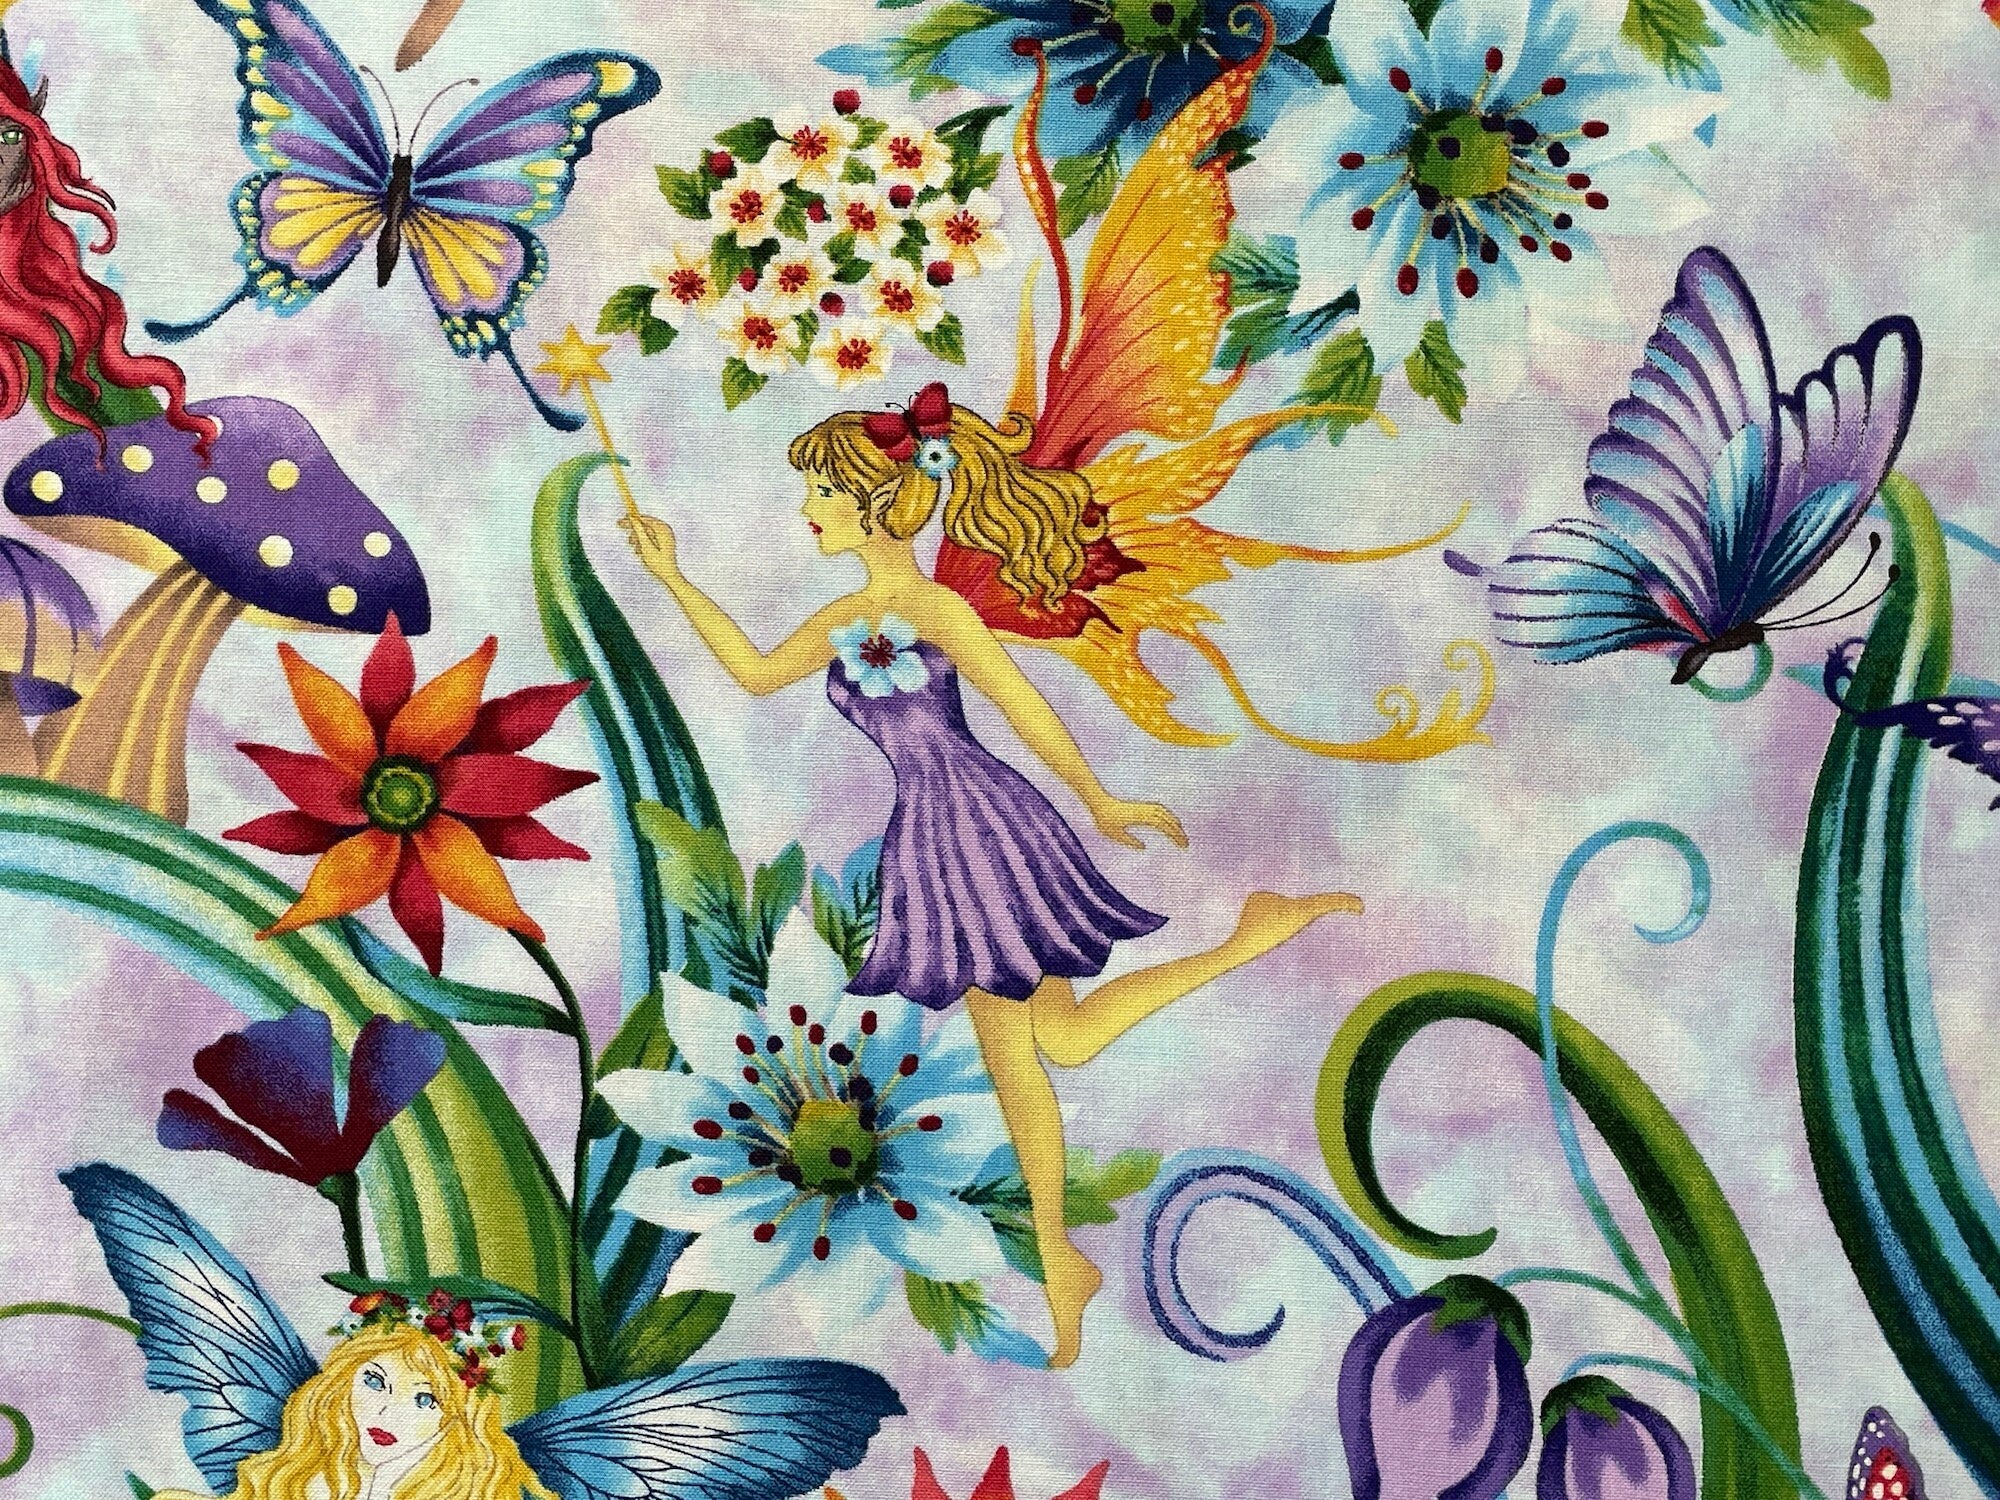 Close up of a fairy with a yellow star wand in her hand. She is wearing a purple dress and is surrounded by flowers and butterflies.